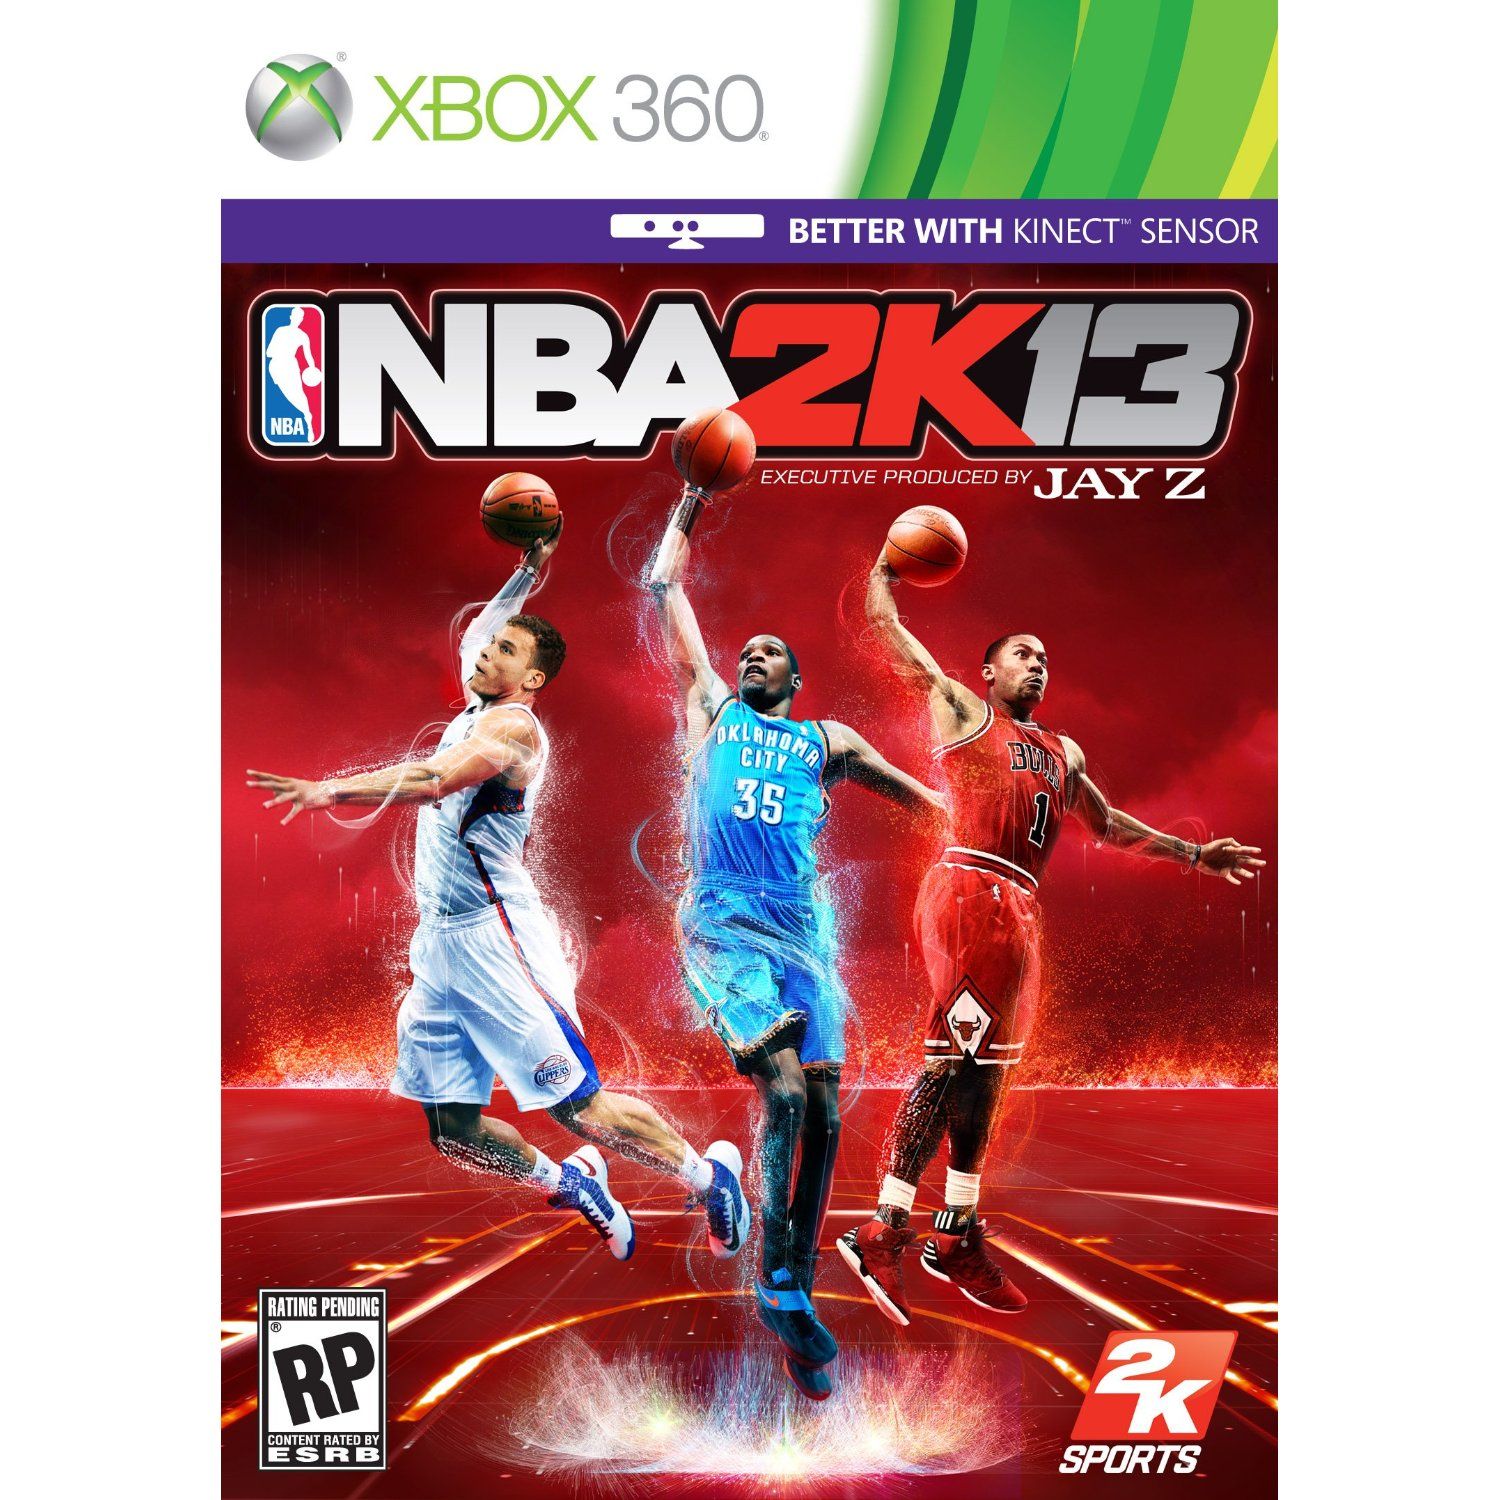 NBA 2K13 to feature Dream Team, 2012 Olympic team